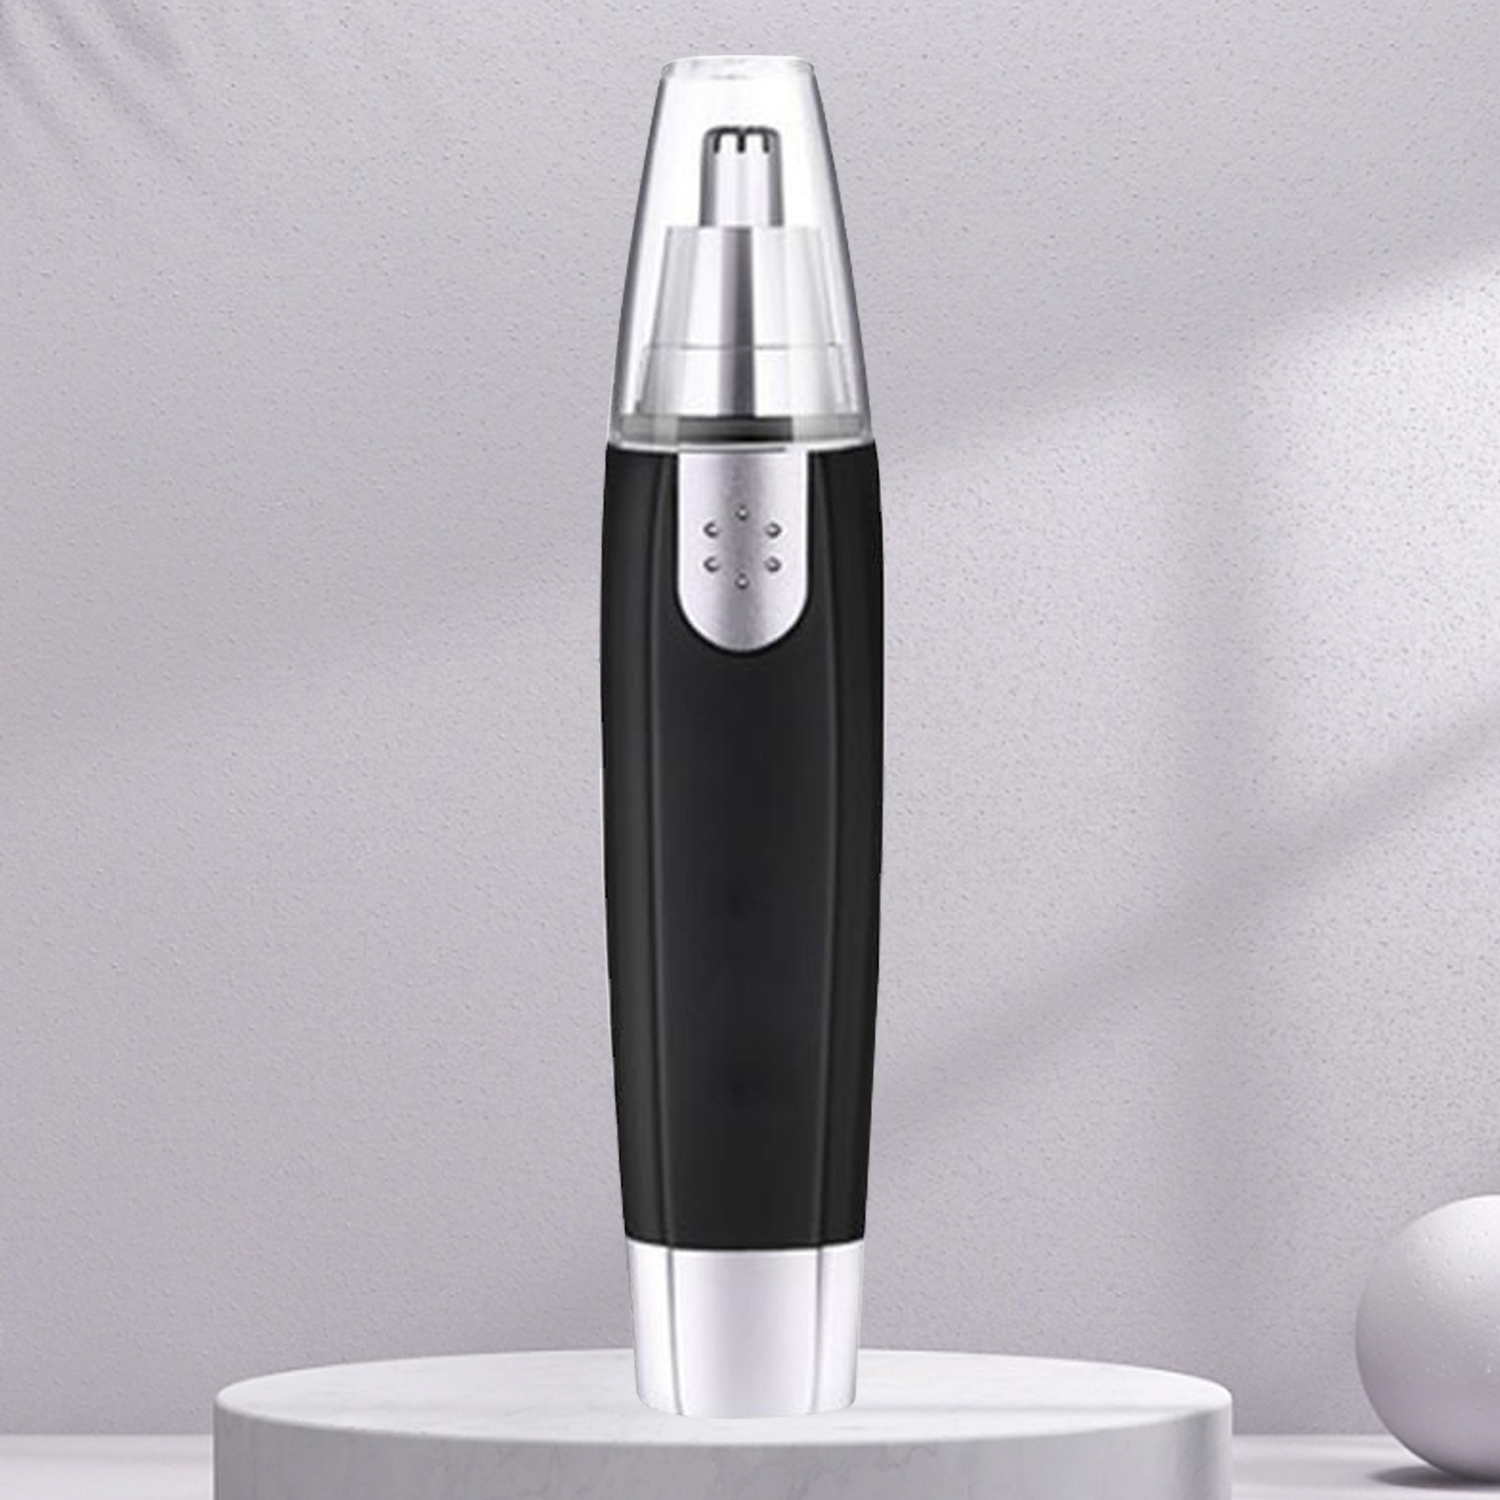 Electric Nose Hair Trimmer Implement Shaver Clipper Ear Neck Eyebrow Trimmer Shaver Man Woman Clean Trimmer